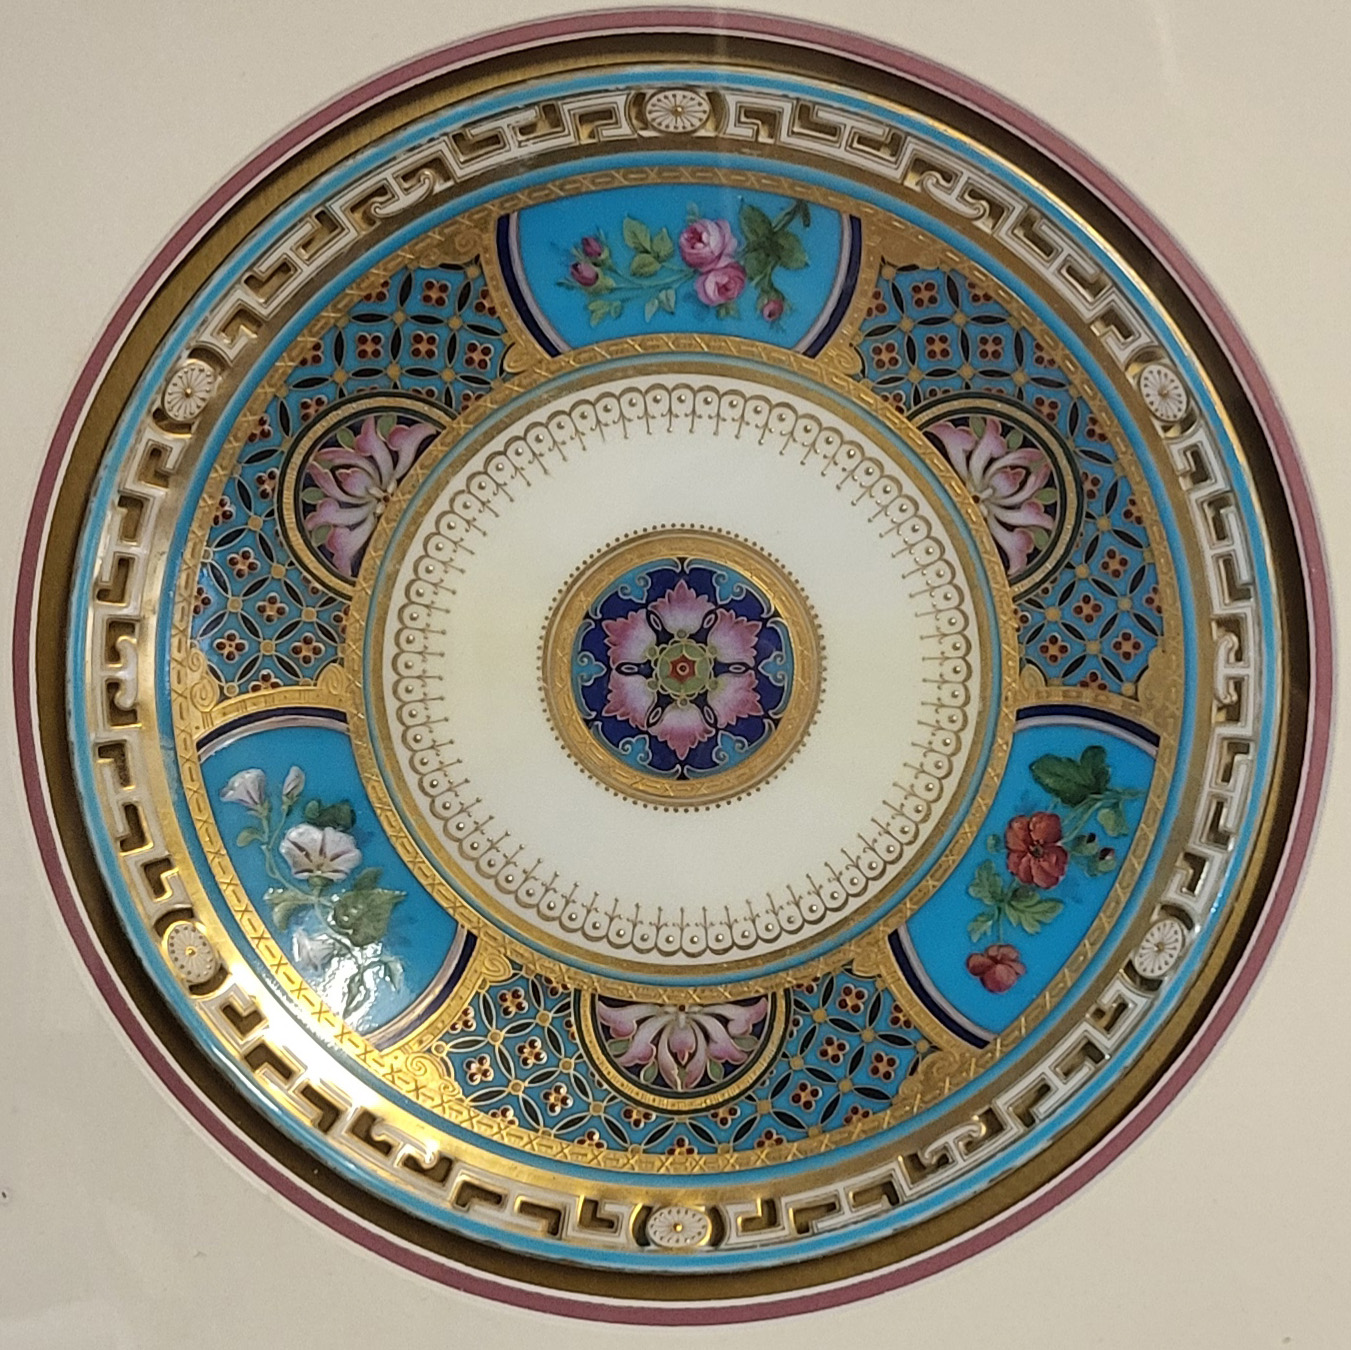 A 19TH CENTURY MINTON PORCELAIN AESTHETIC MOVEMENT CABINET PLATE Designed by Dr. Christopher - Image 2 of 5